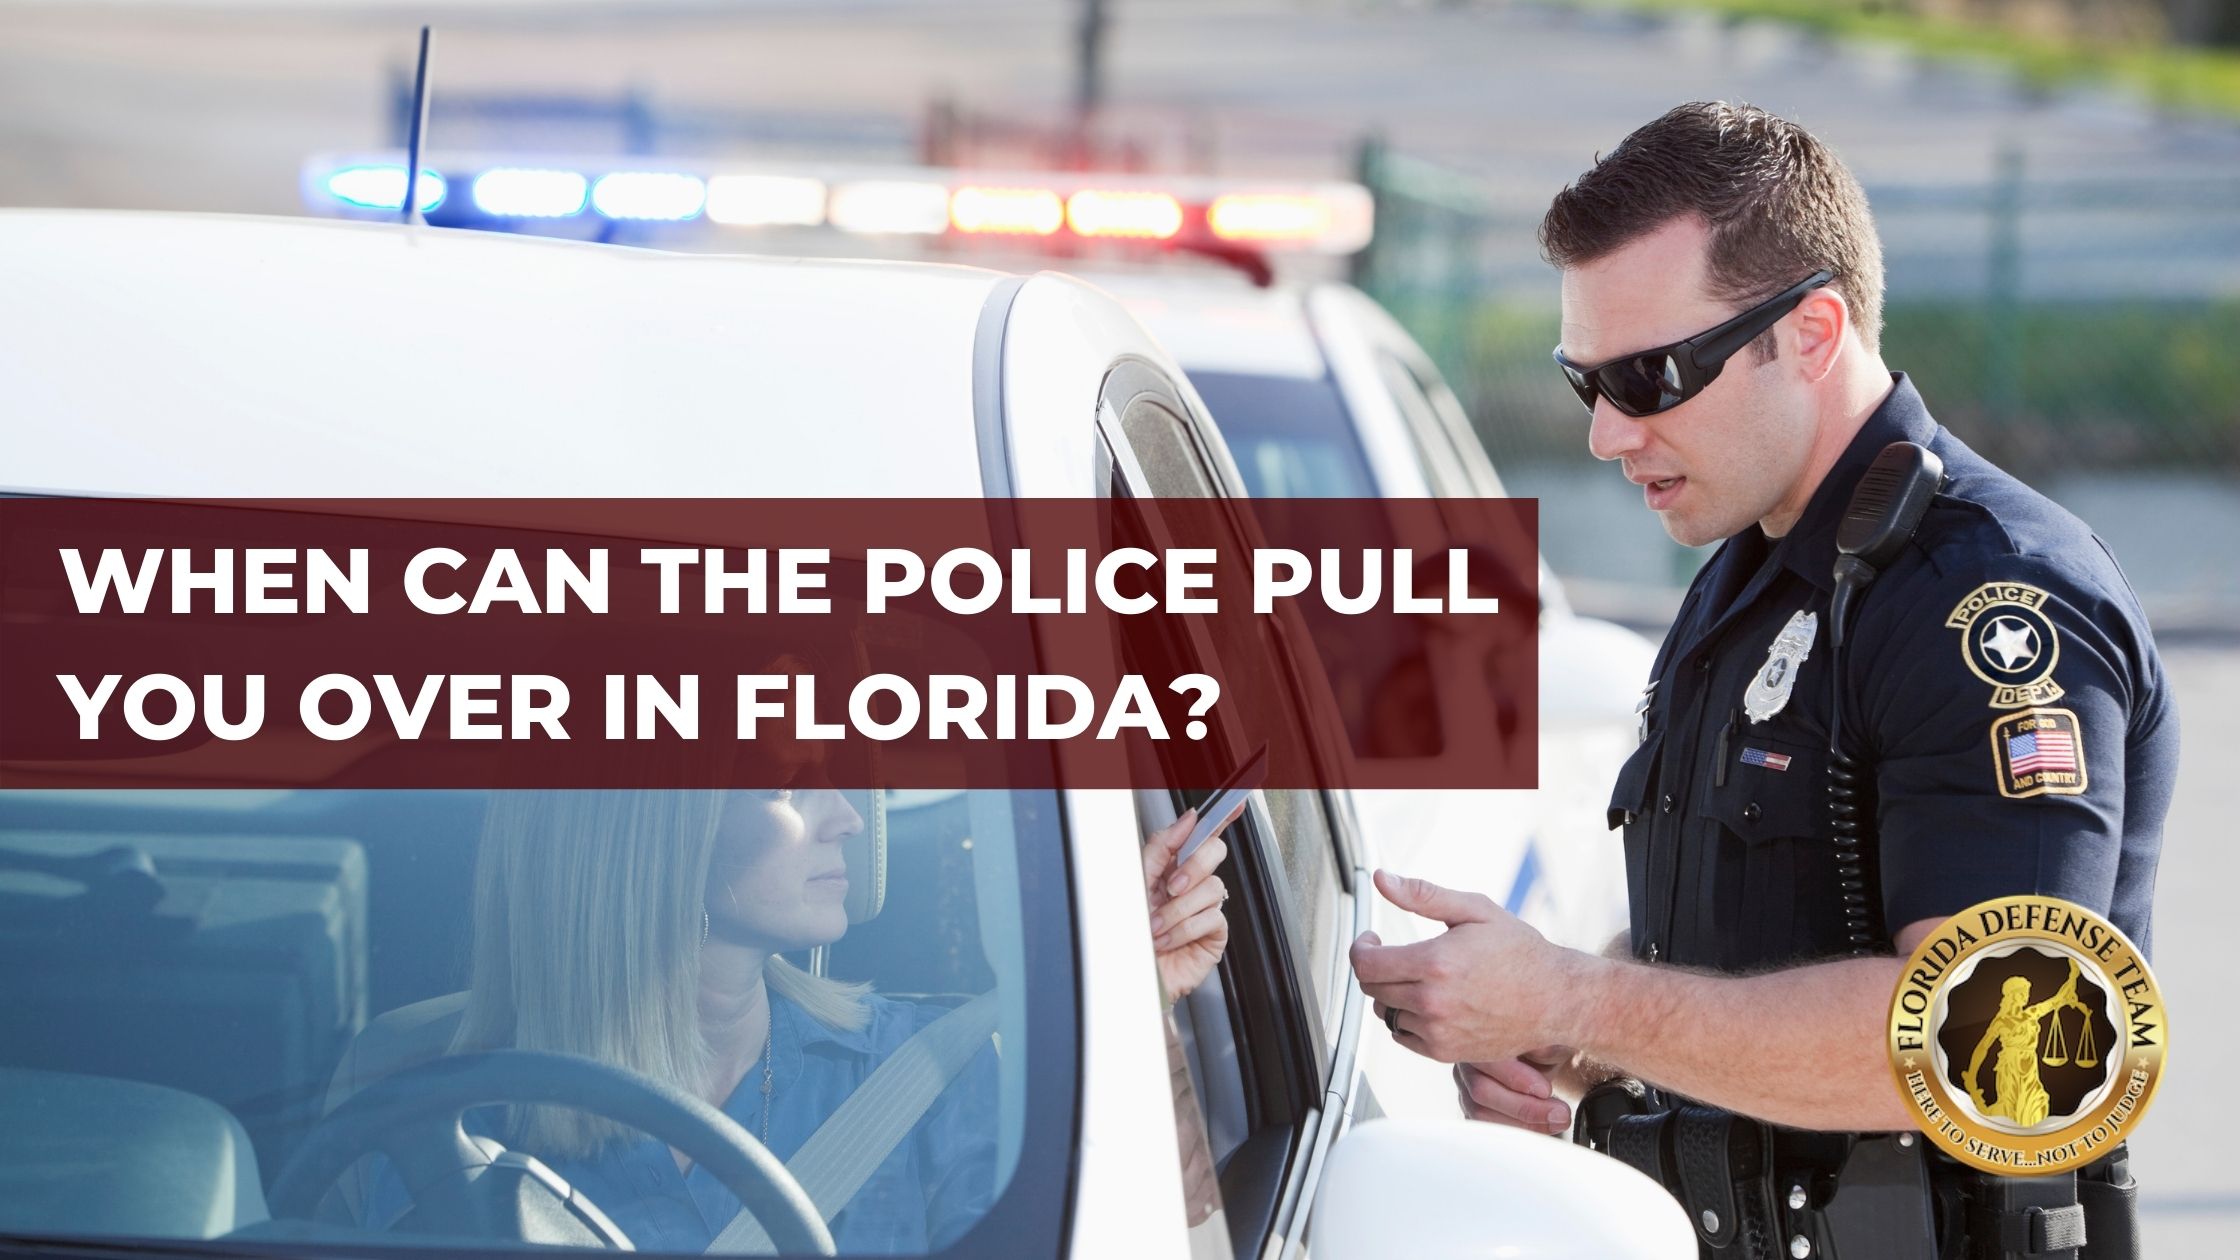 https://floridadefenseteam.com/wp-content/uploads/2021/07/When-Can-the-Police-Pull-You-Over-in-Florida.jpeg